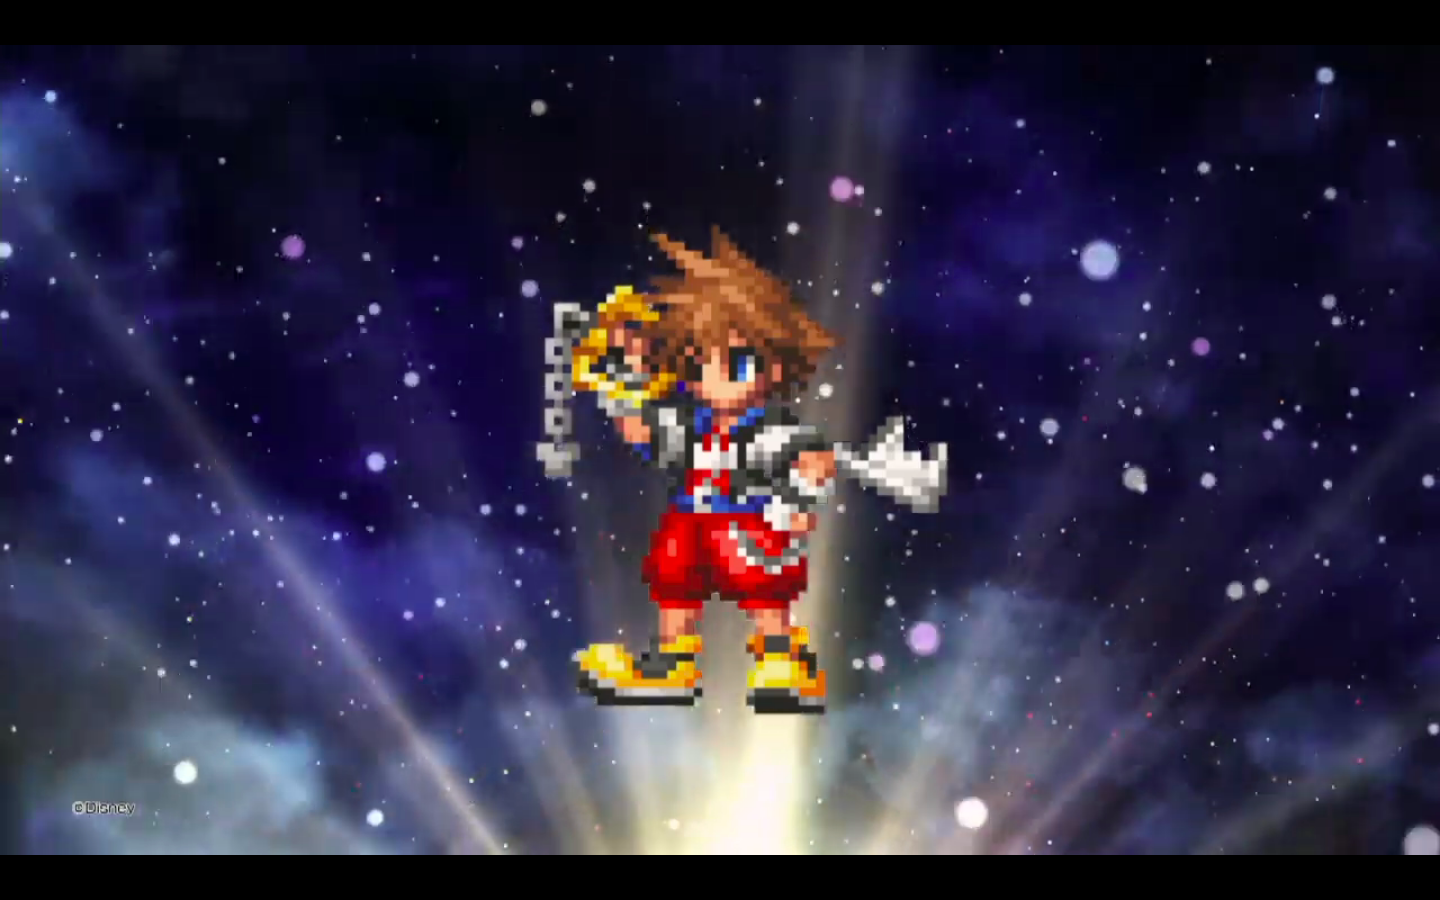 Kingdom Hearts Collaboration Event With Final Fantasy Brave Exvius Announced Sora To Make An Appearance Kingdom Hearts News Kh13 For Kingdom Hearts